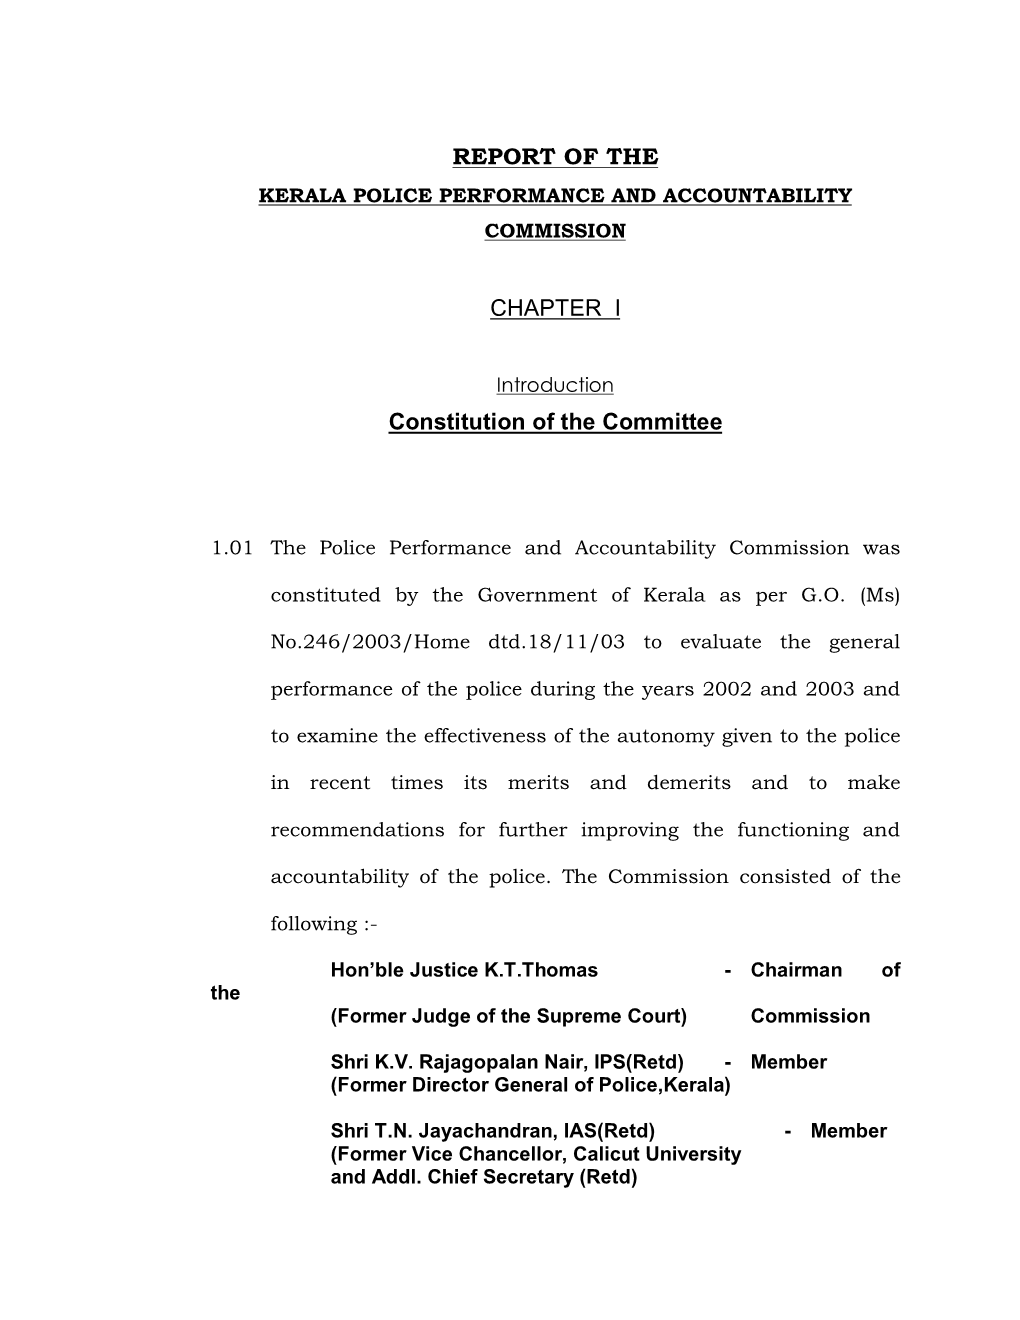 Kerala Police Performance and Accountability Commission